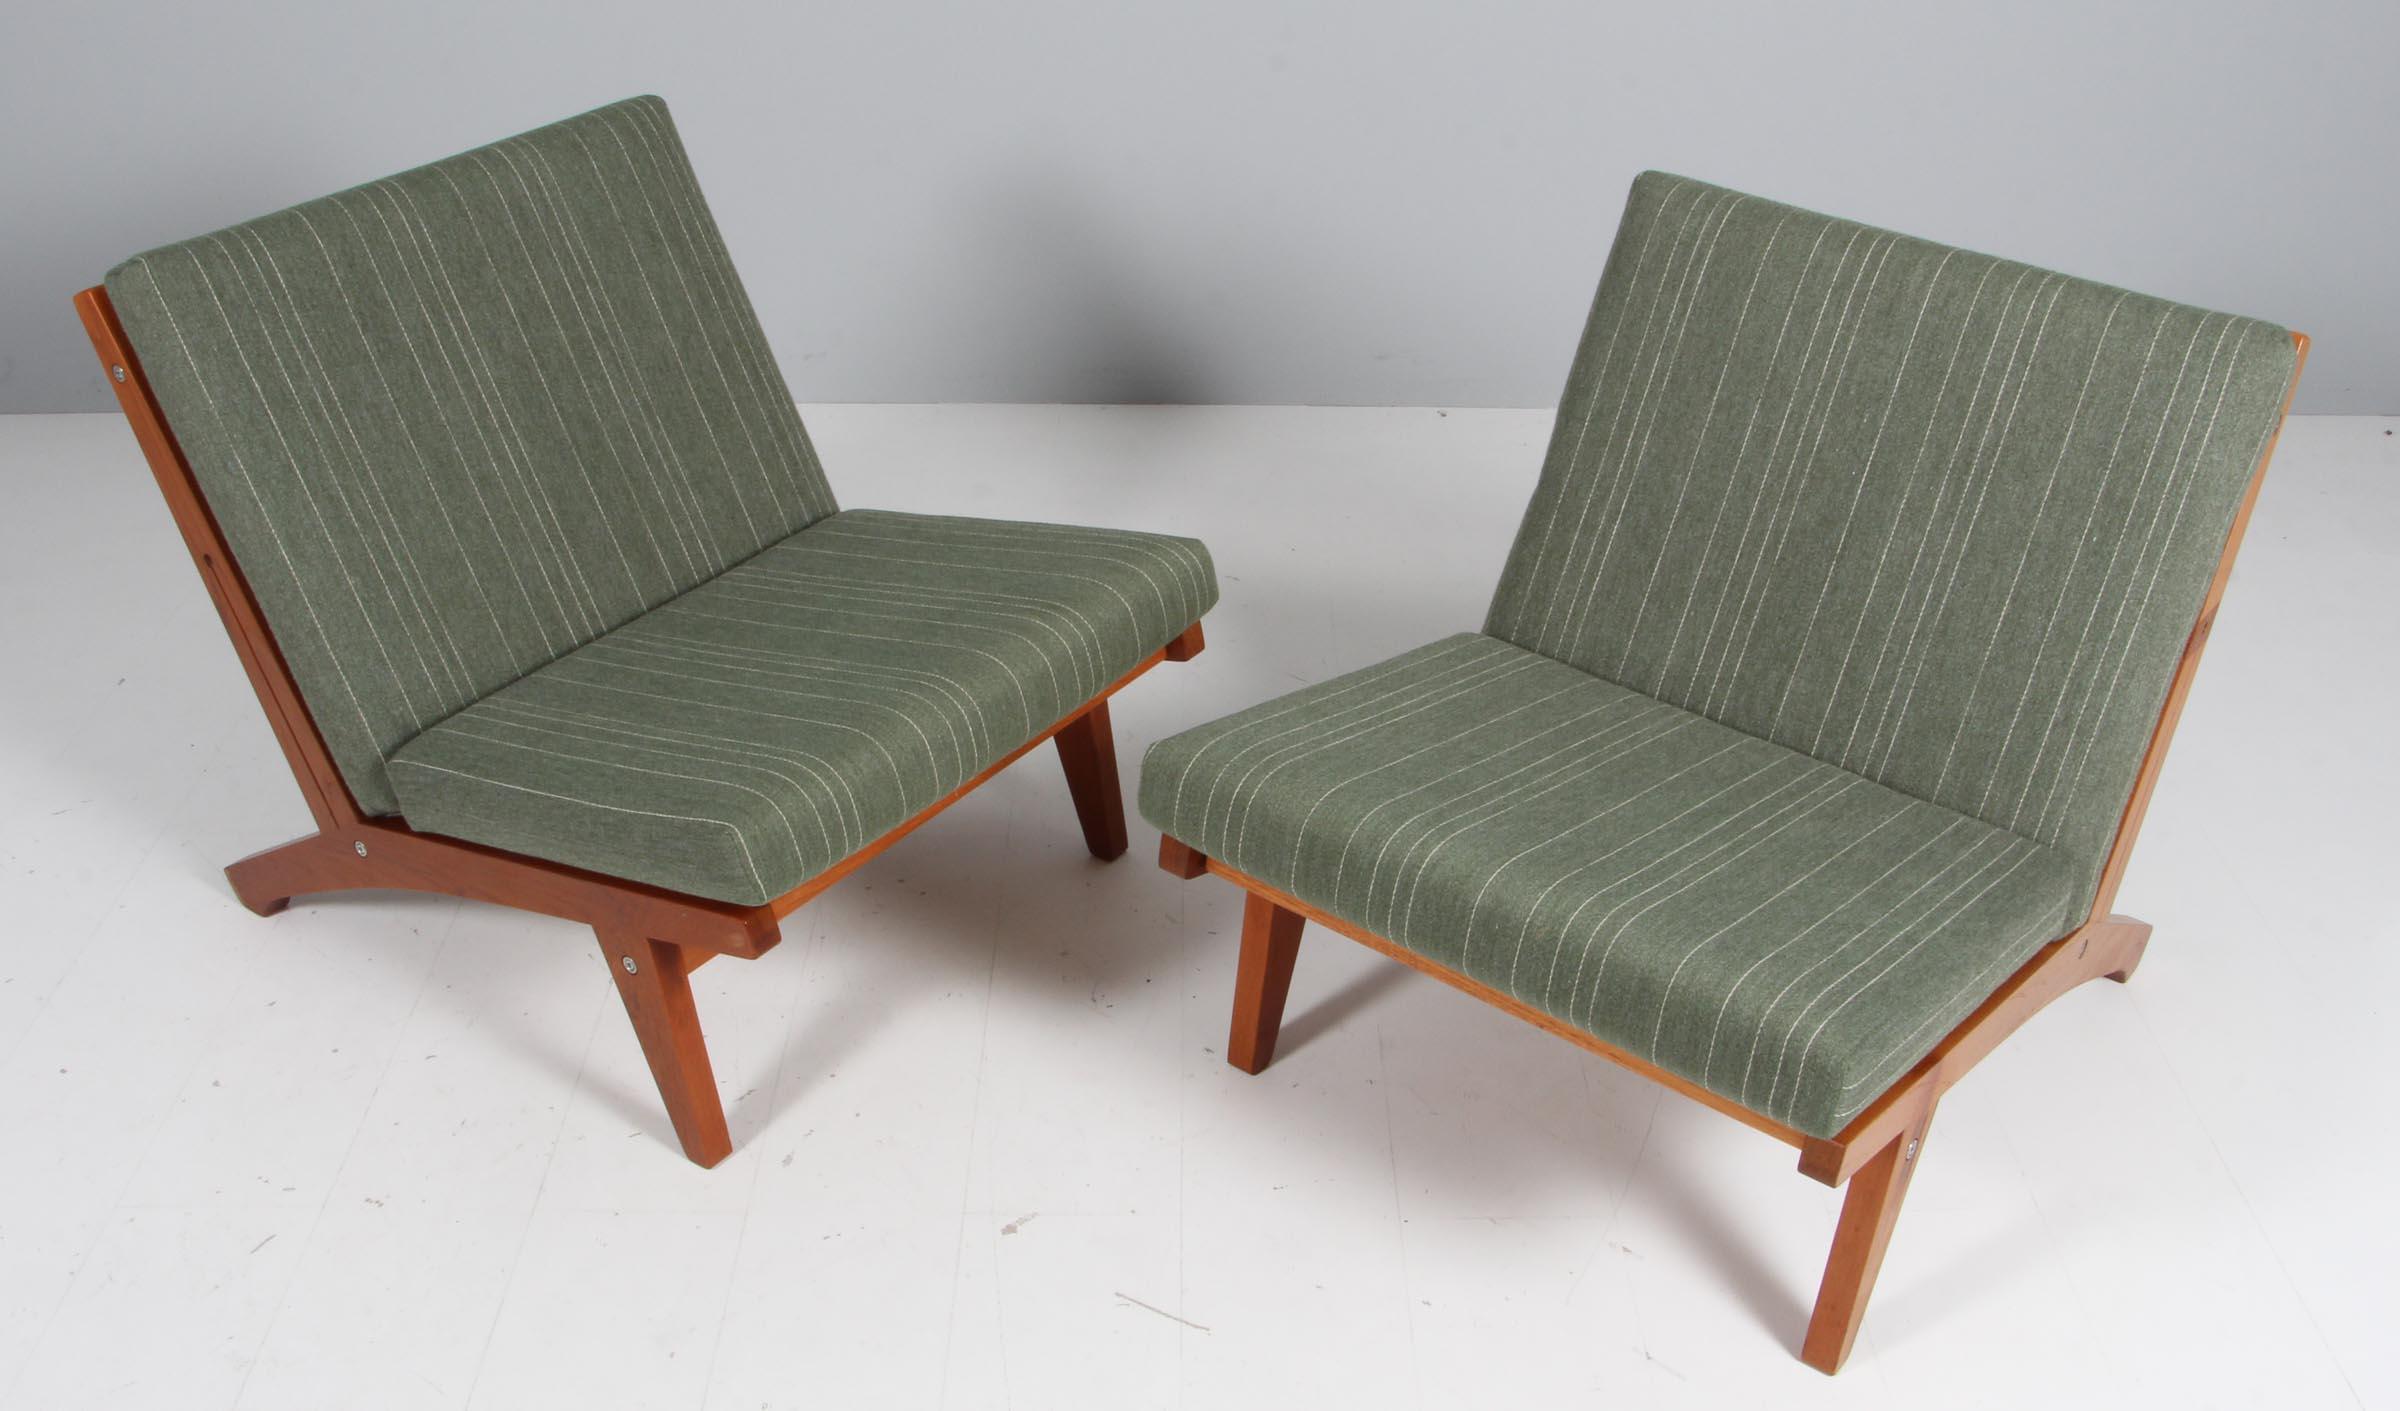 Hans J. Wegner lounge chairs with loose cushions upholstered with Savak wool.

Frame of solid teak.

Model GE-370, made by GETAMA.